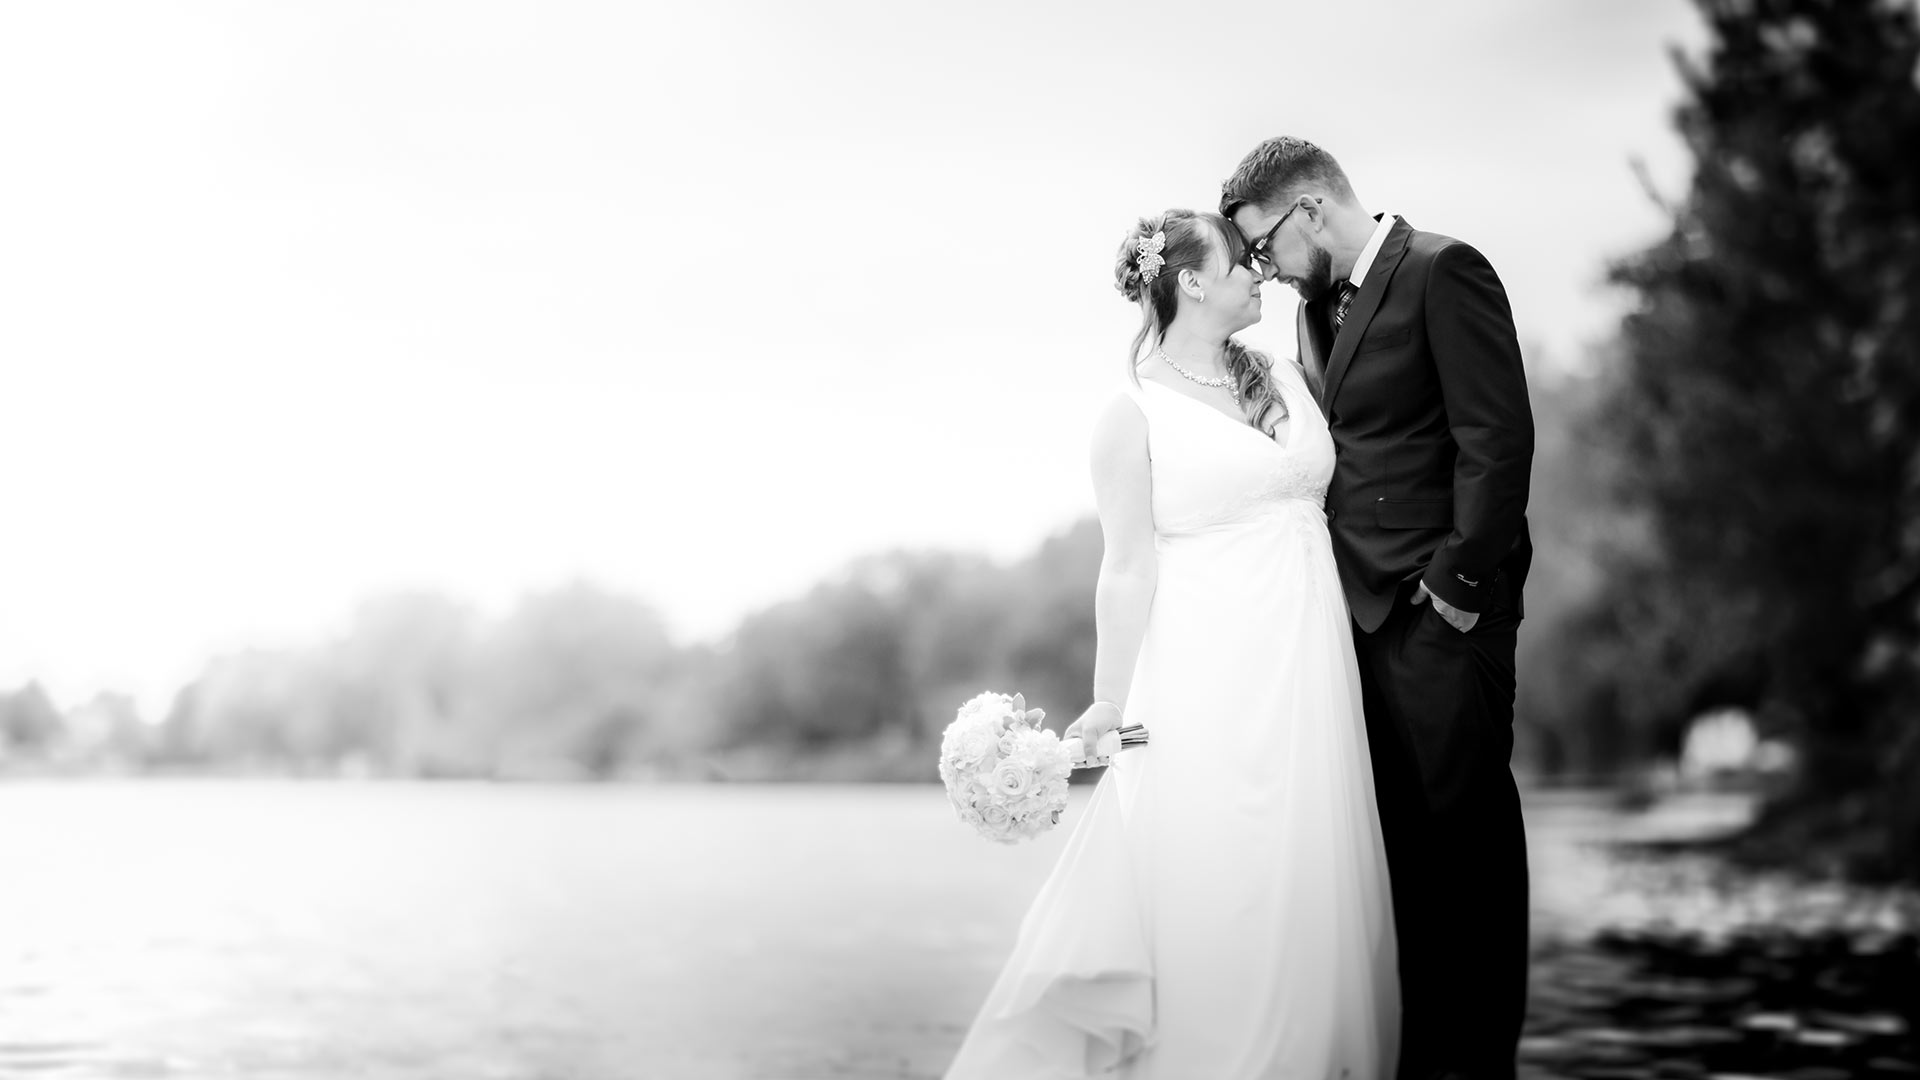 Montreal Photographer jtrott | Wedding photography, family, events